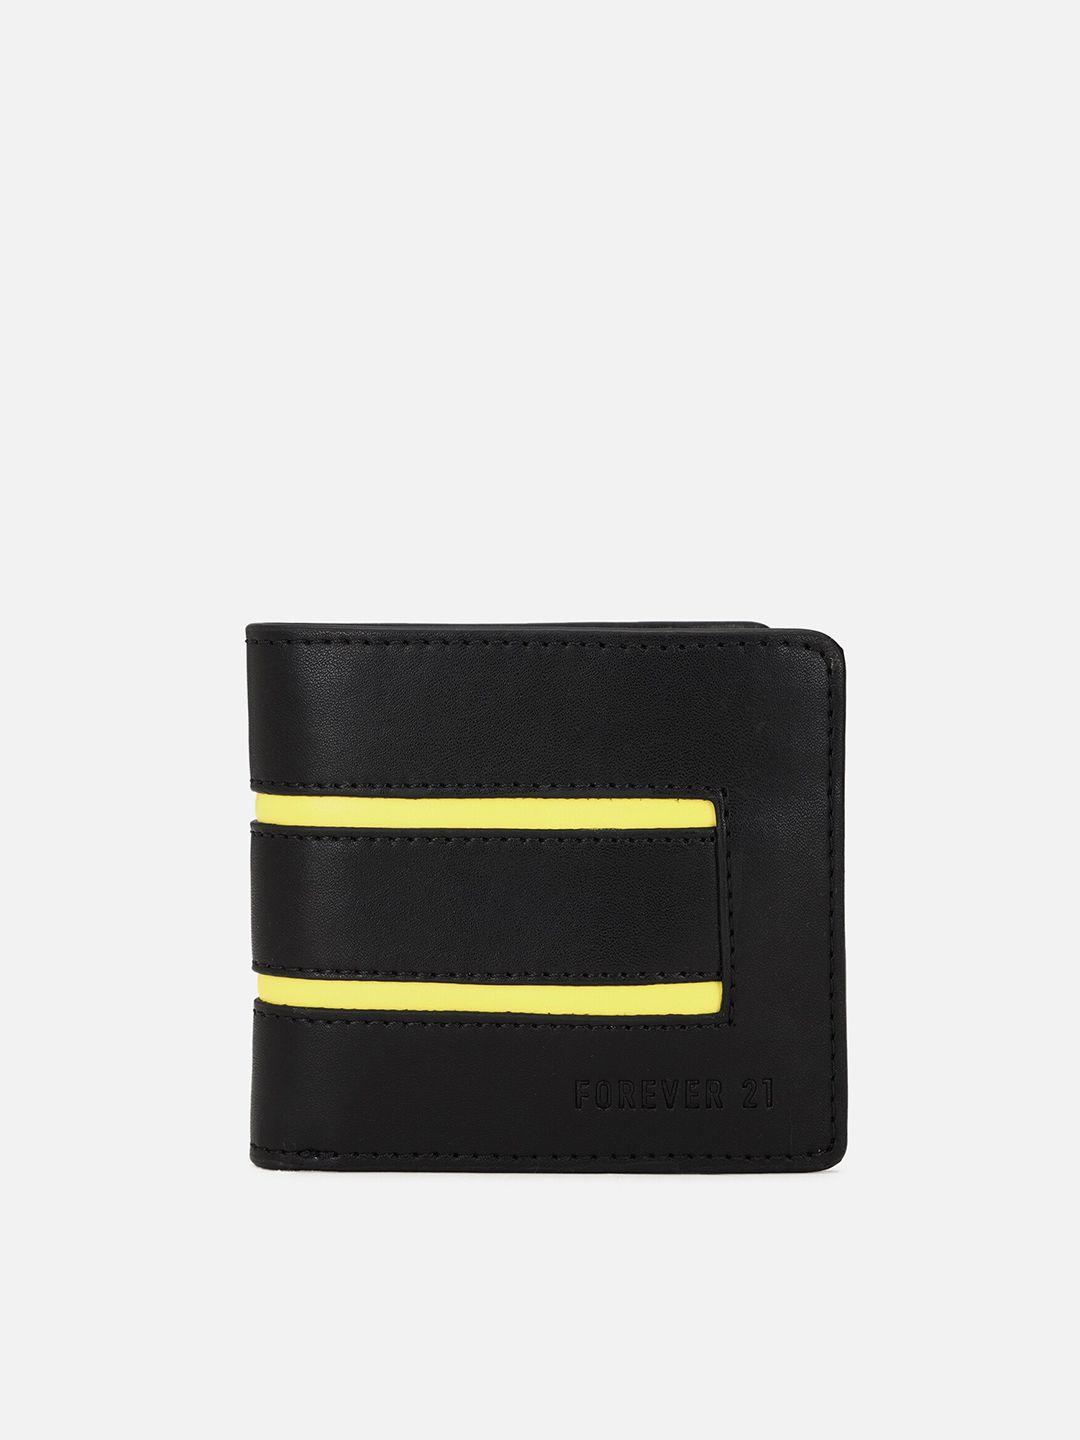 forever-21-men-black-&-yellow-striped-pu-two-fold-wallet